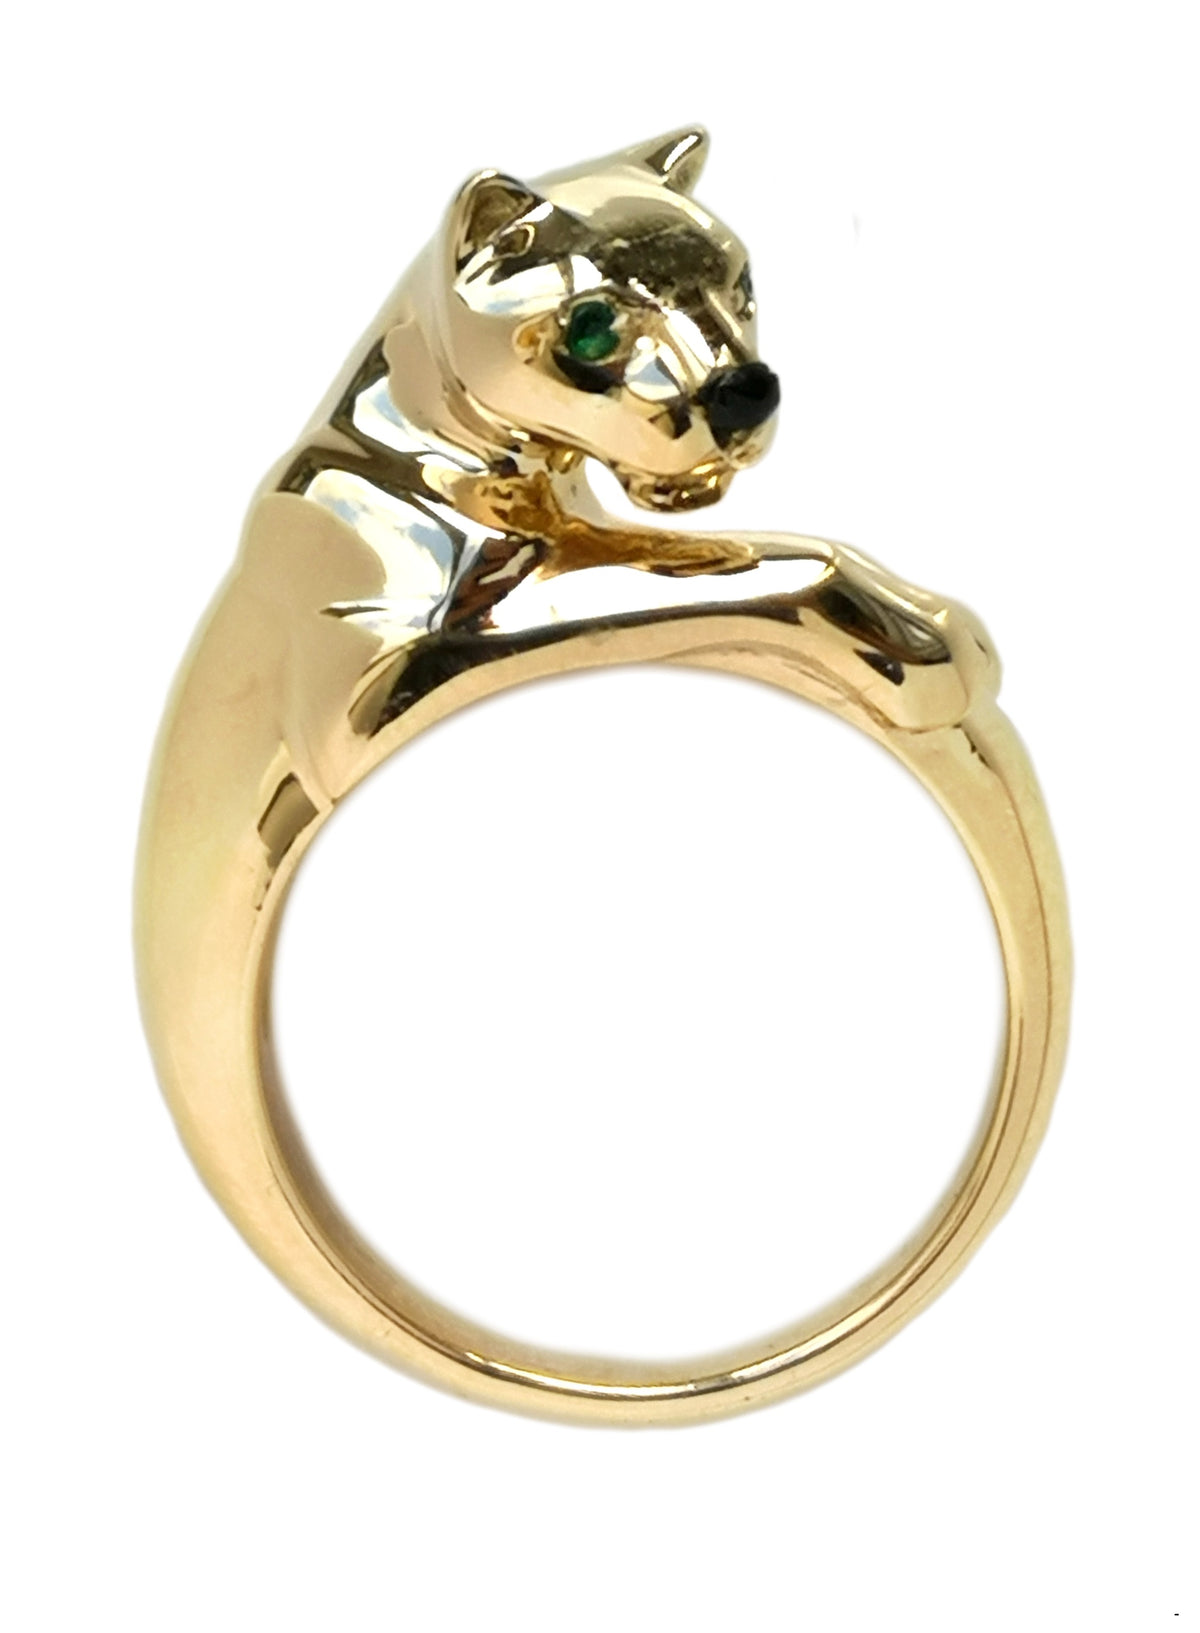 Cartier Panthere Ring in 18k Gold & Emerald, Size 50